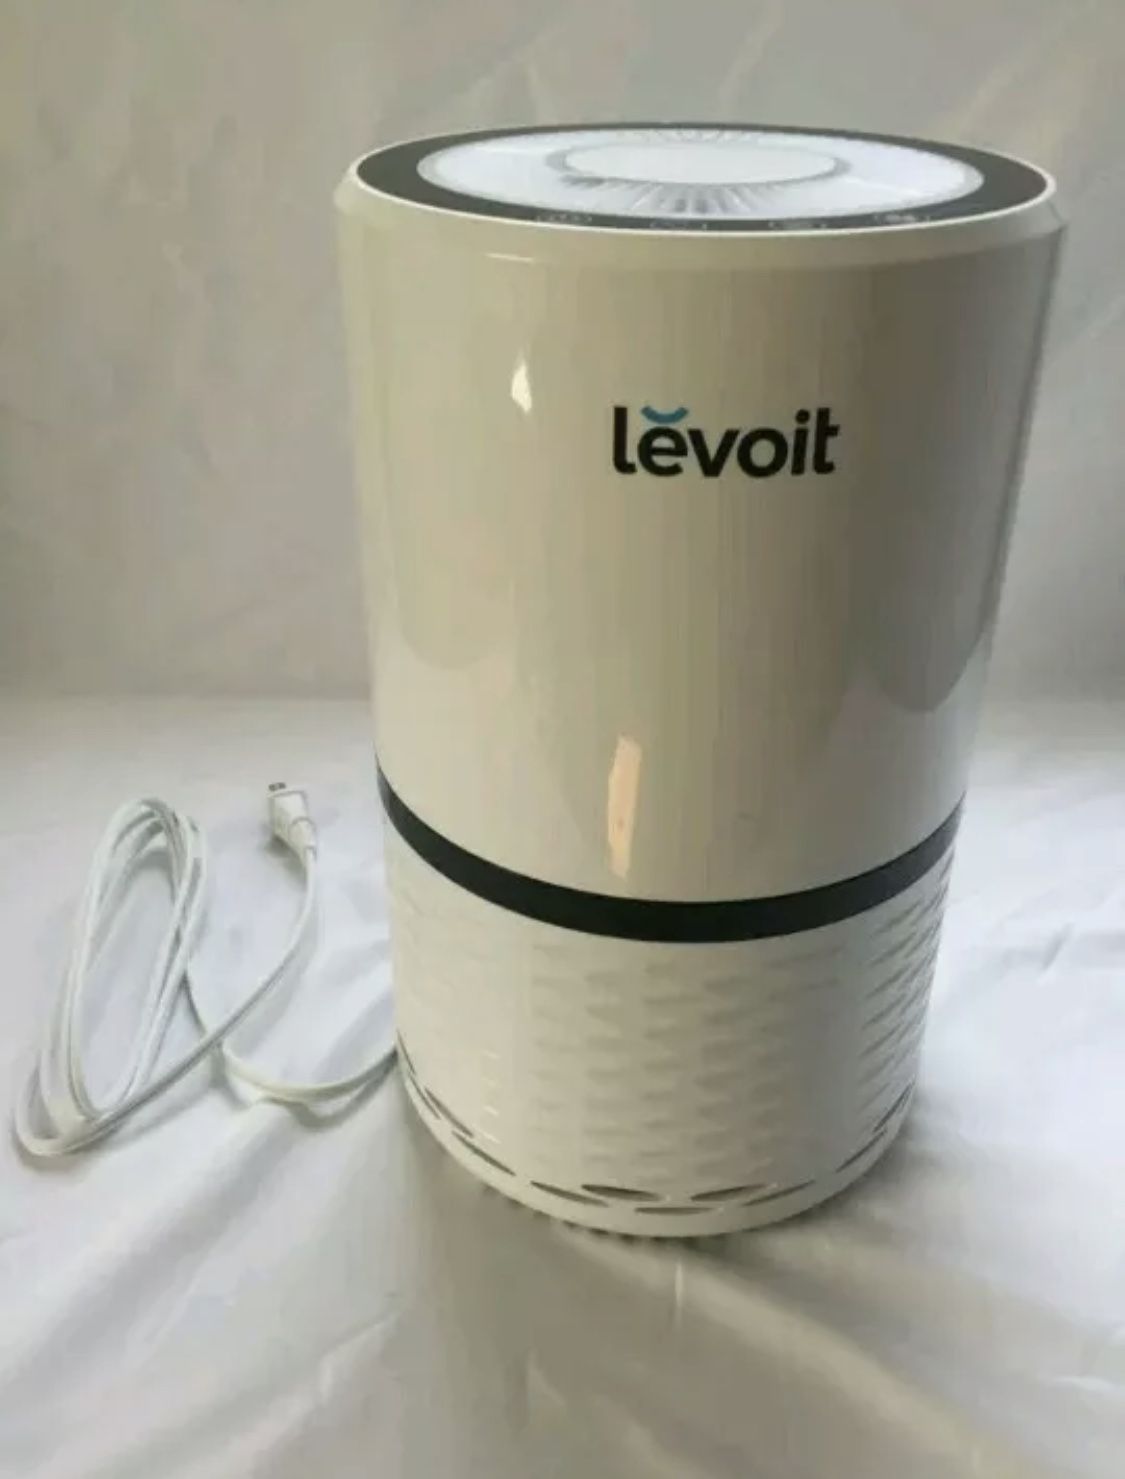 Levoit LV-H132 Air Purifier with True Hepa Filter, box included, Retails $90+